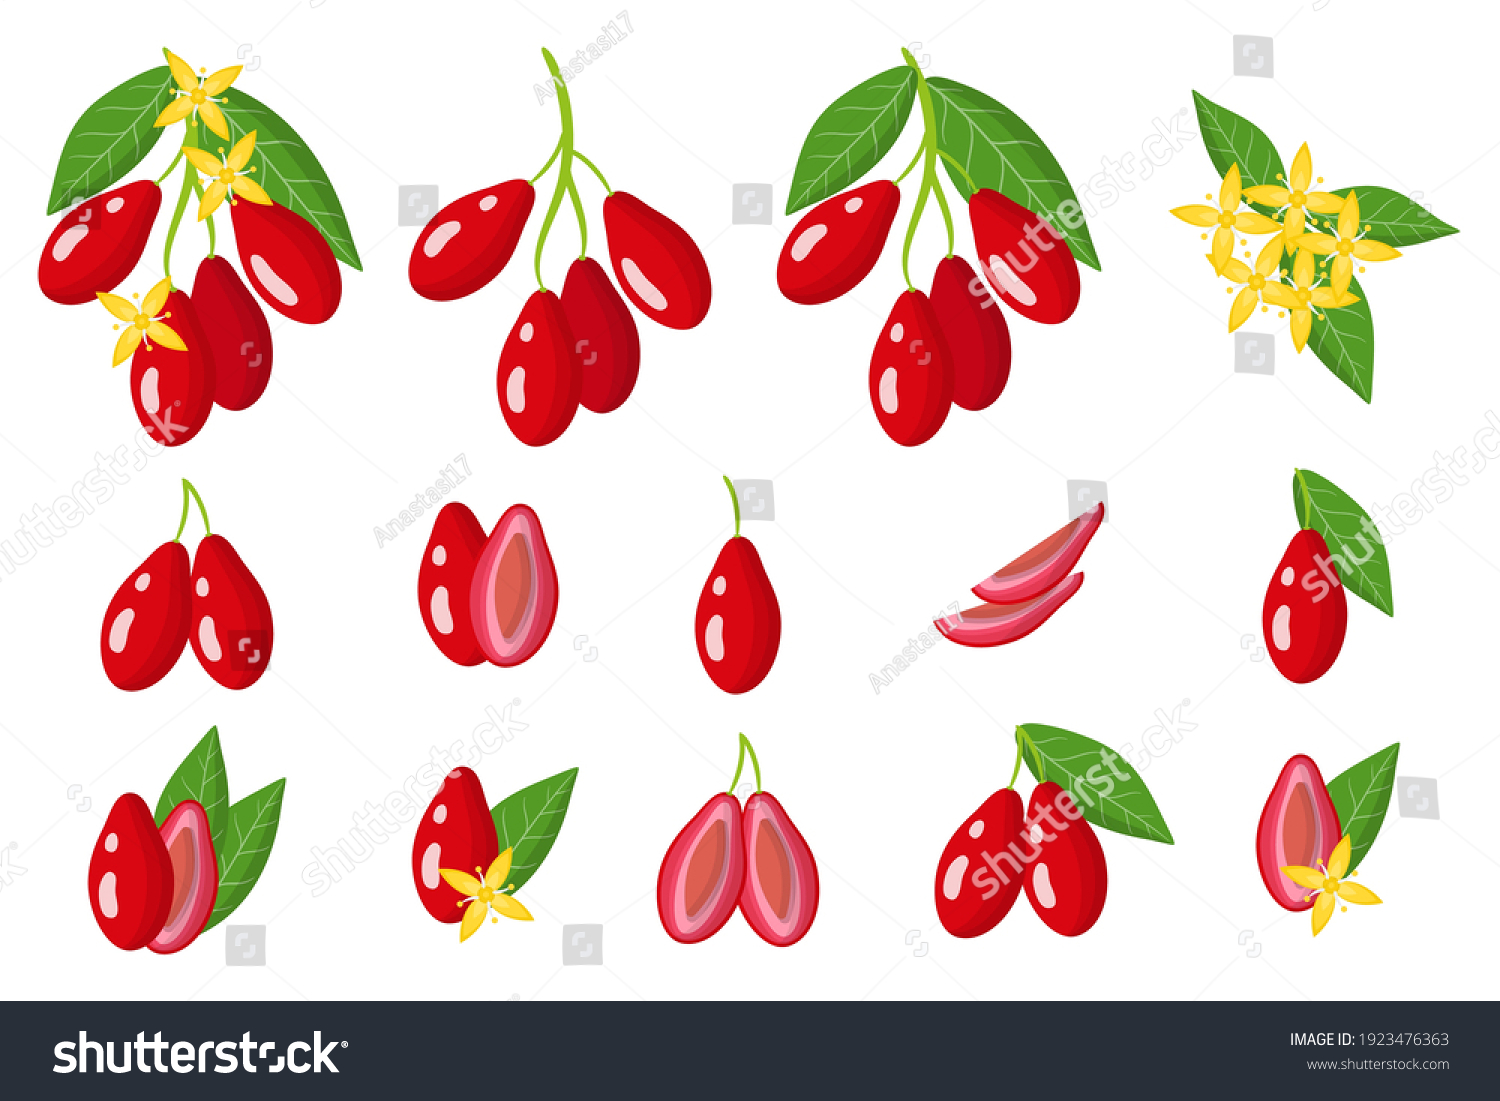 SVG of Set of illustrations with dogwood exotic fruits, flowers and leaves isolated on a white background. Isolated vector icons set. svg